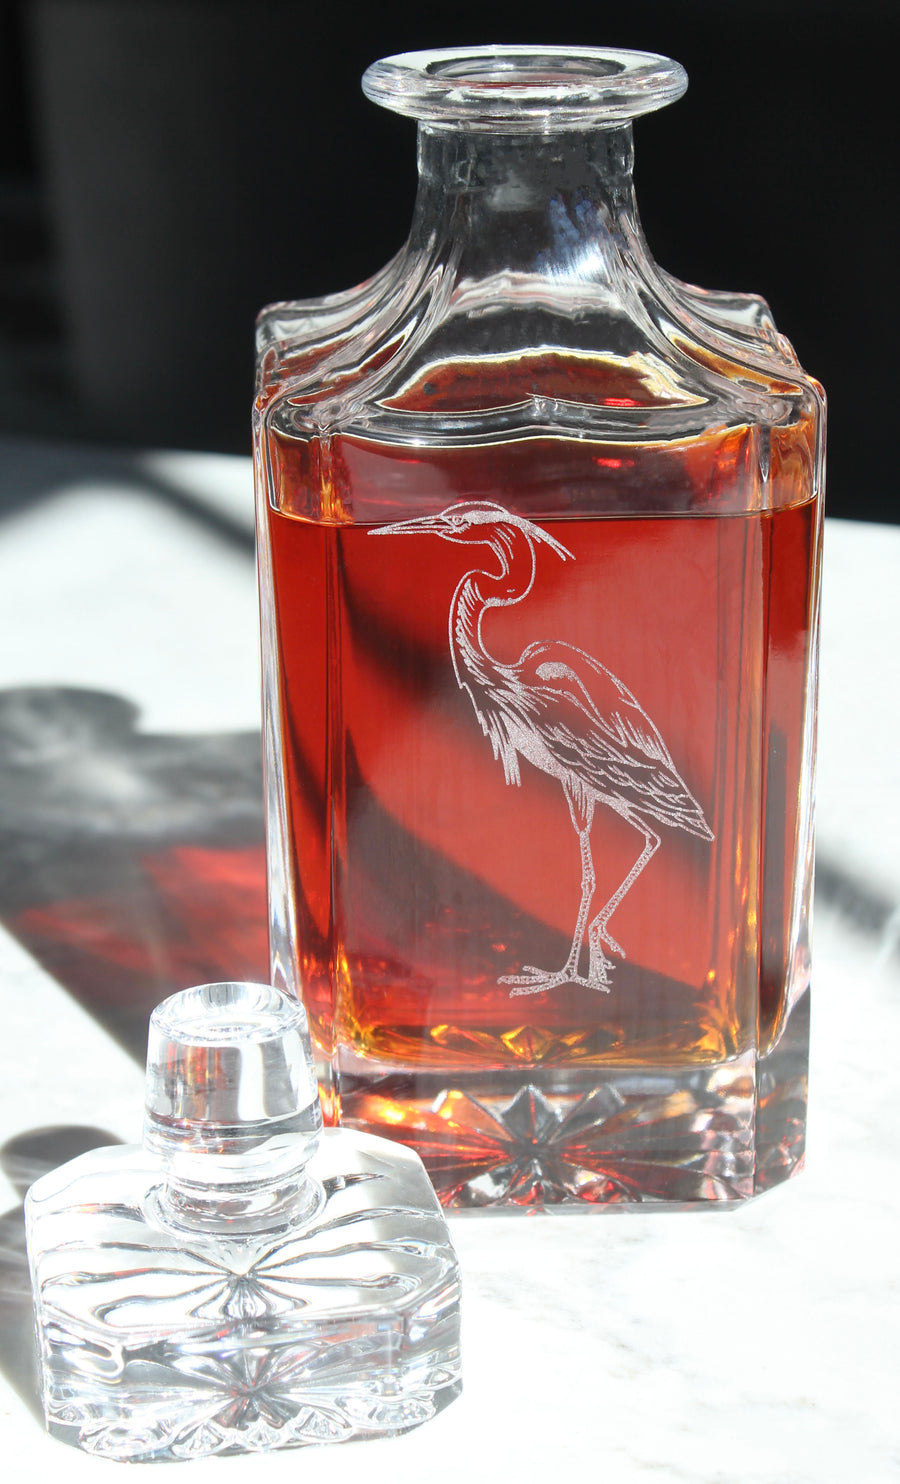 Blue Heron Engraved Whiskey Decanter - 26oz Square Crystal Decanter with Stopper